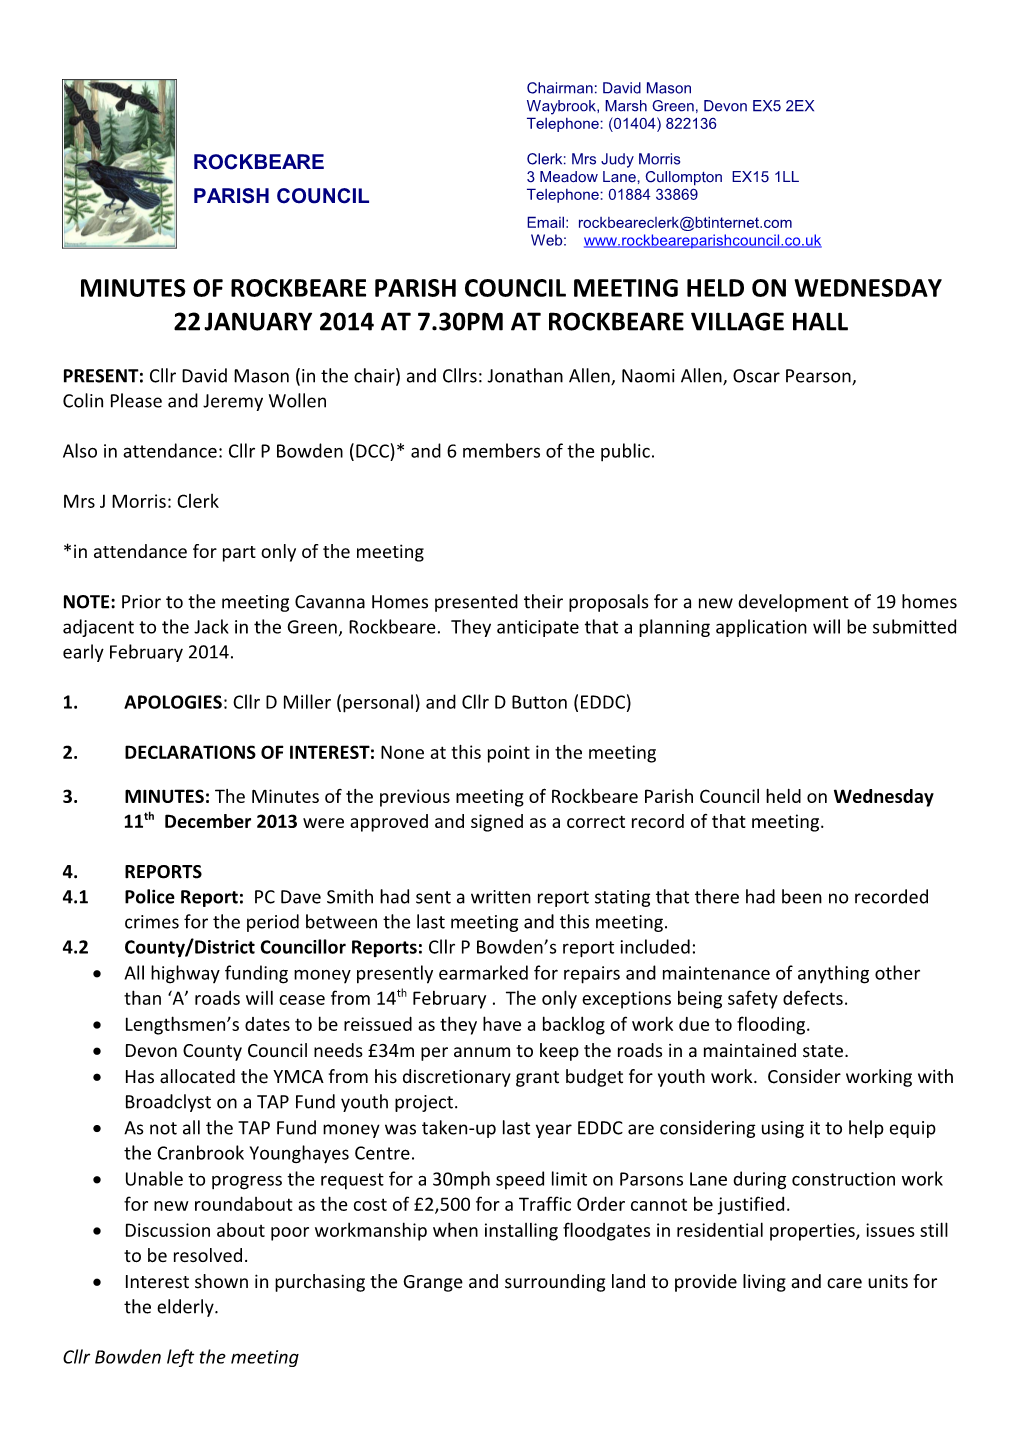 Minutes of Rockbeare Parish Council Meeting Held on Wednesday 22January2014 at 7.30Pm